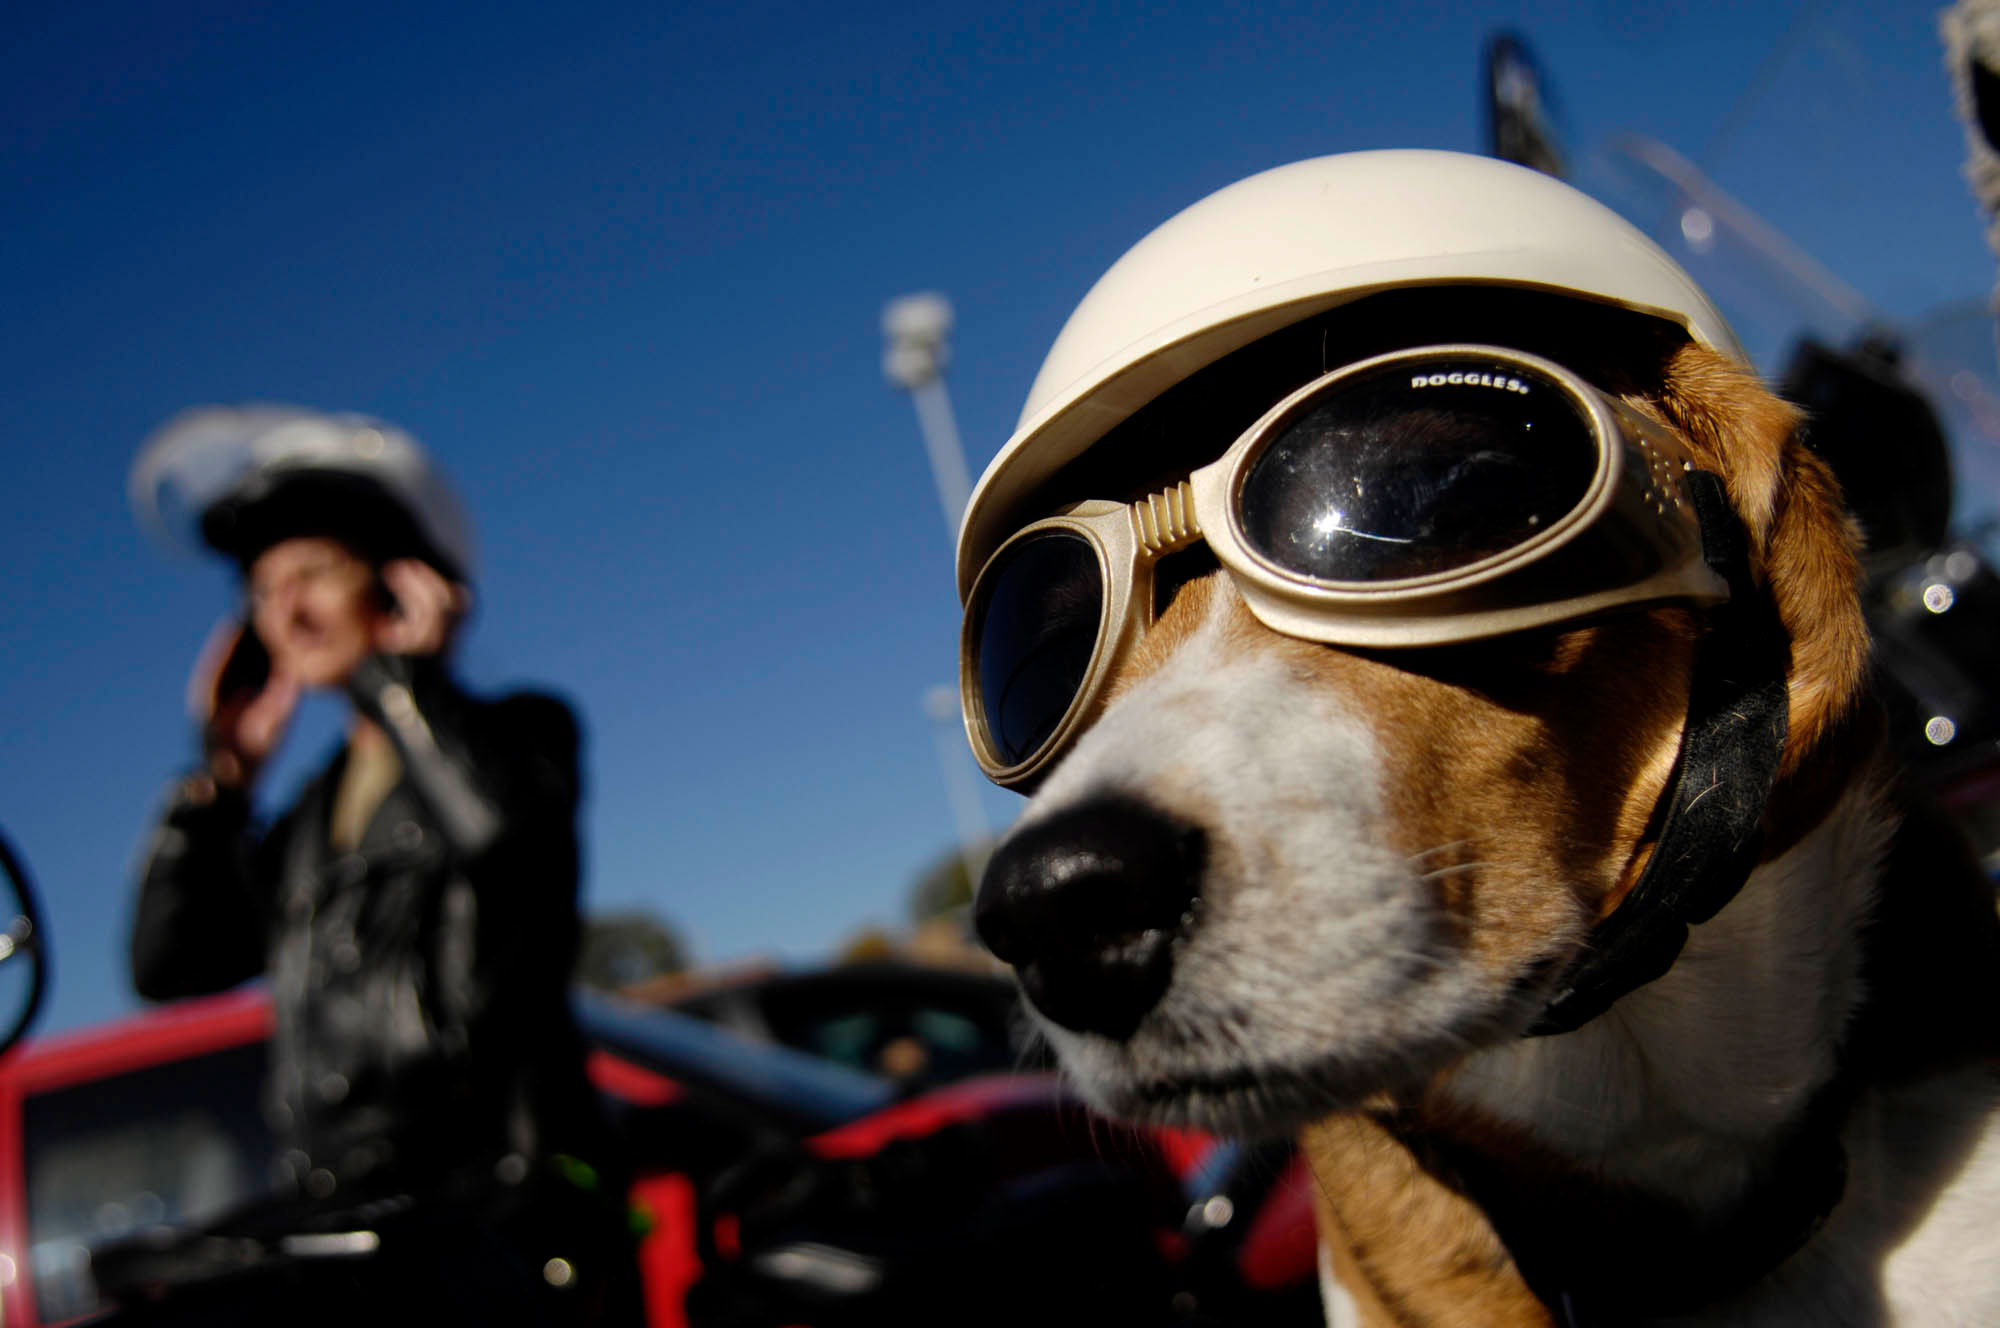 Sidecar companion, Amy, has doggles and a helmet to keep her safe on the ride